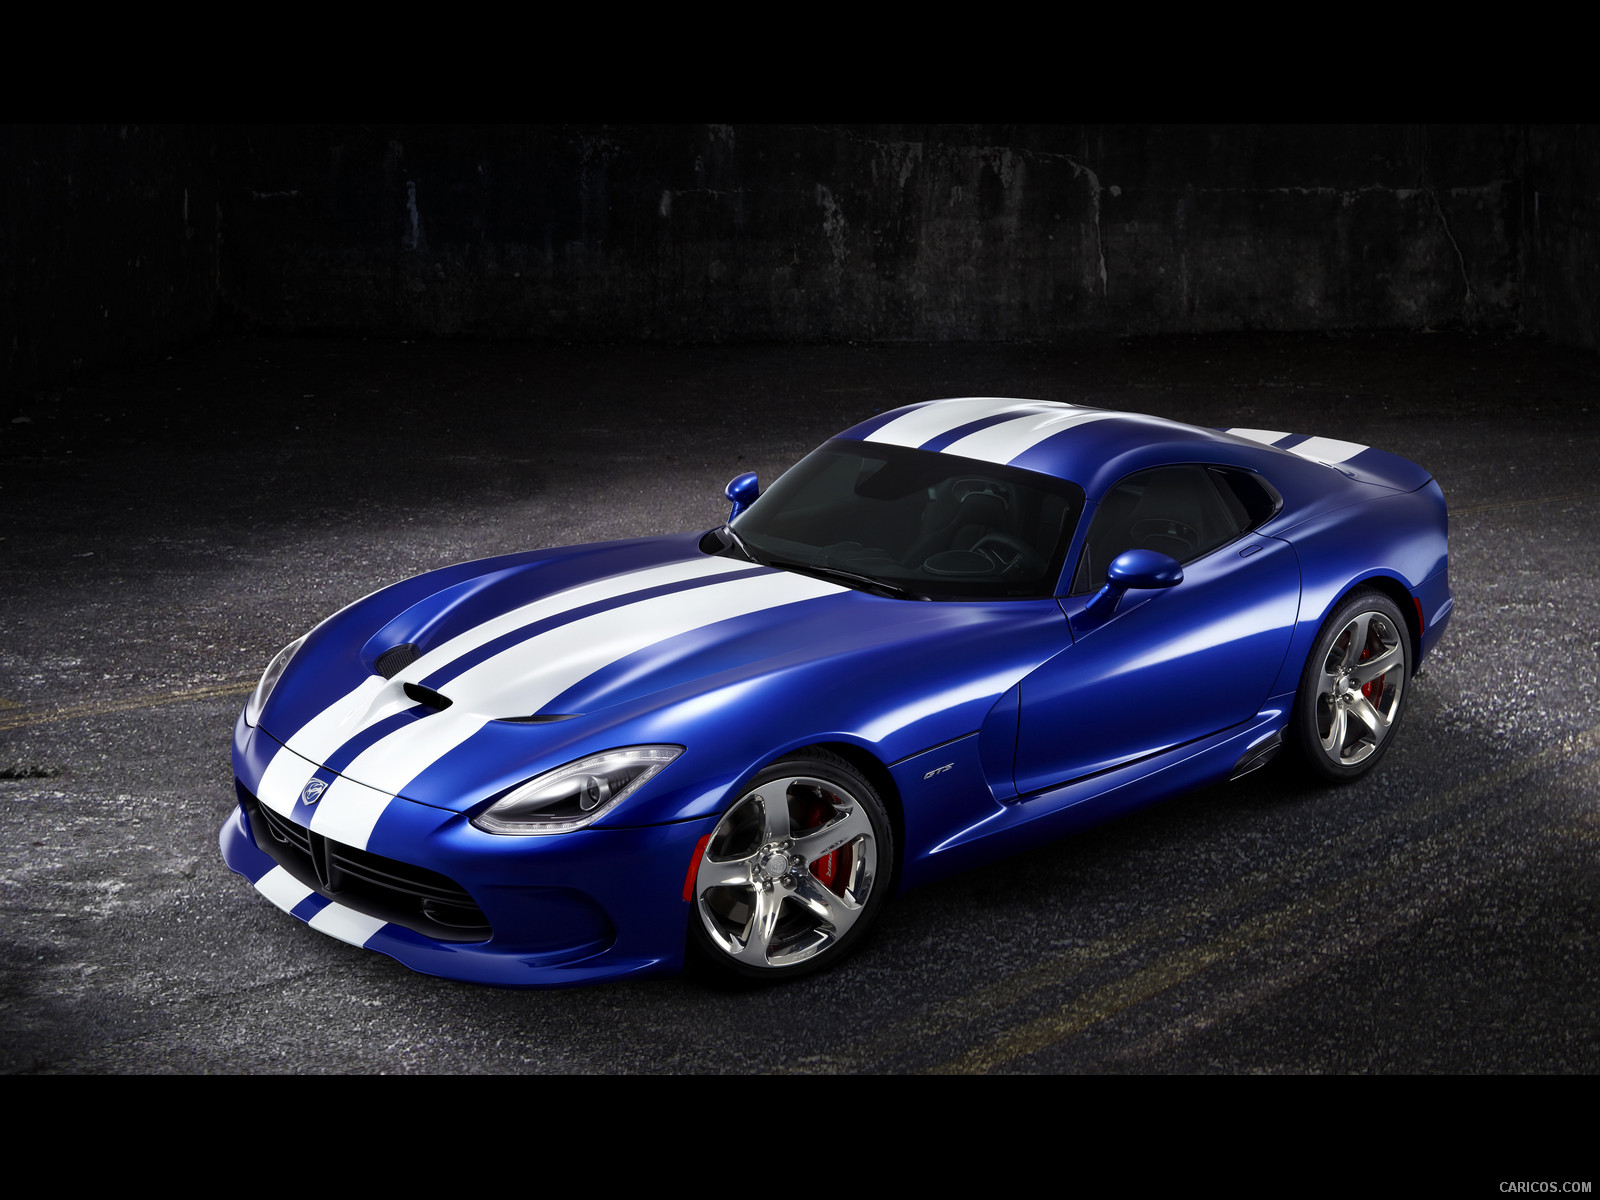 2013 Dodge SRT Viper GTS Launch Edition - Front, 1600x1200, #1 of 10